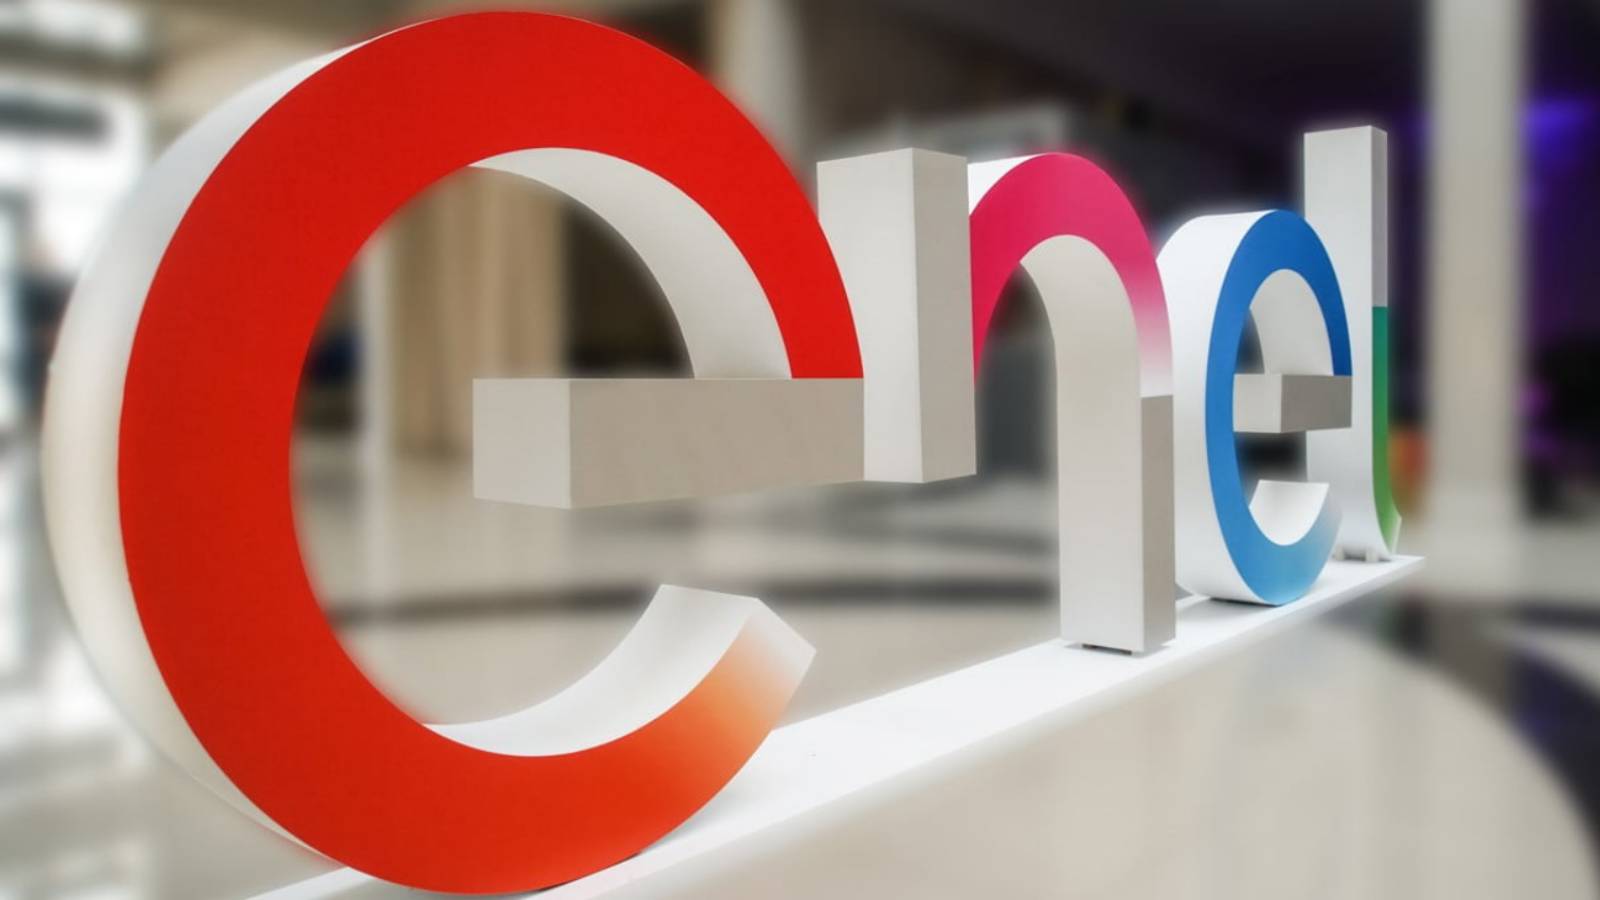 ENEL's LAST MINUTE Decision Applying to Romanian Customers